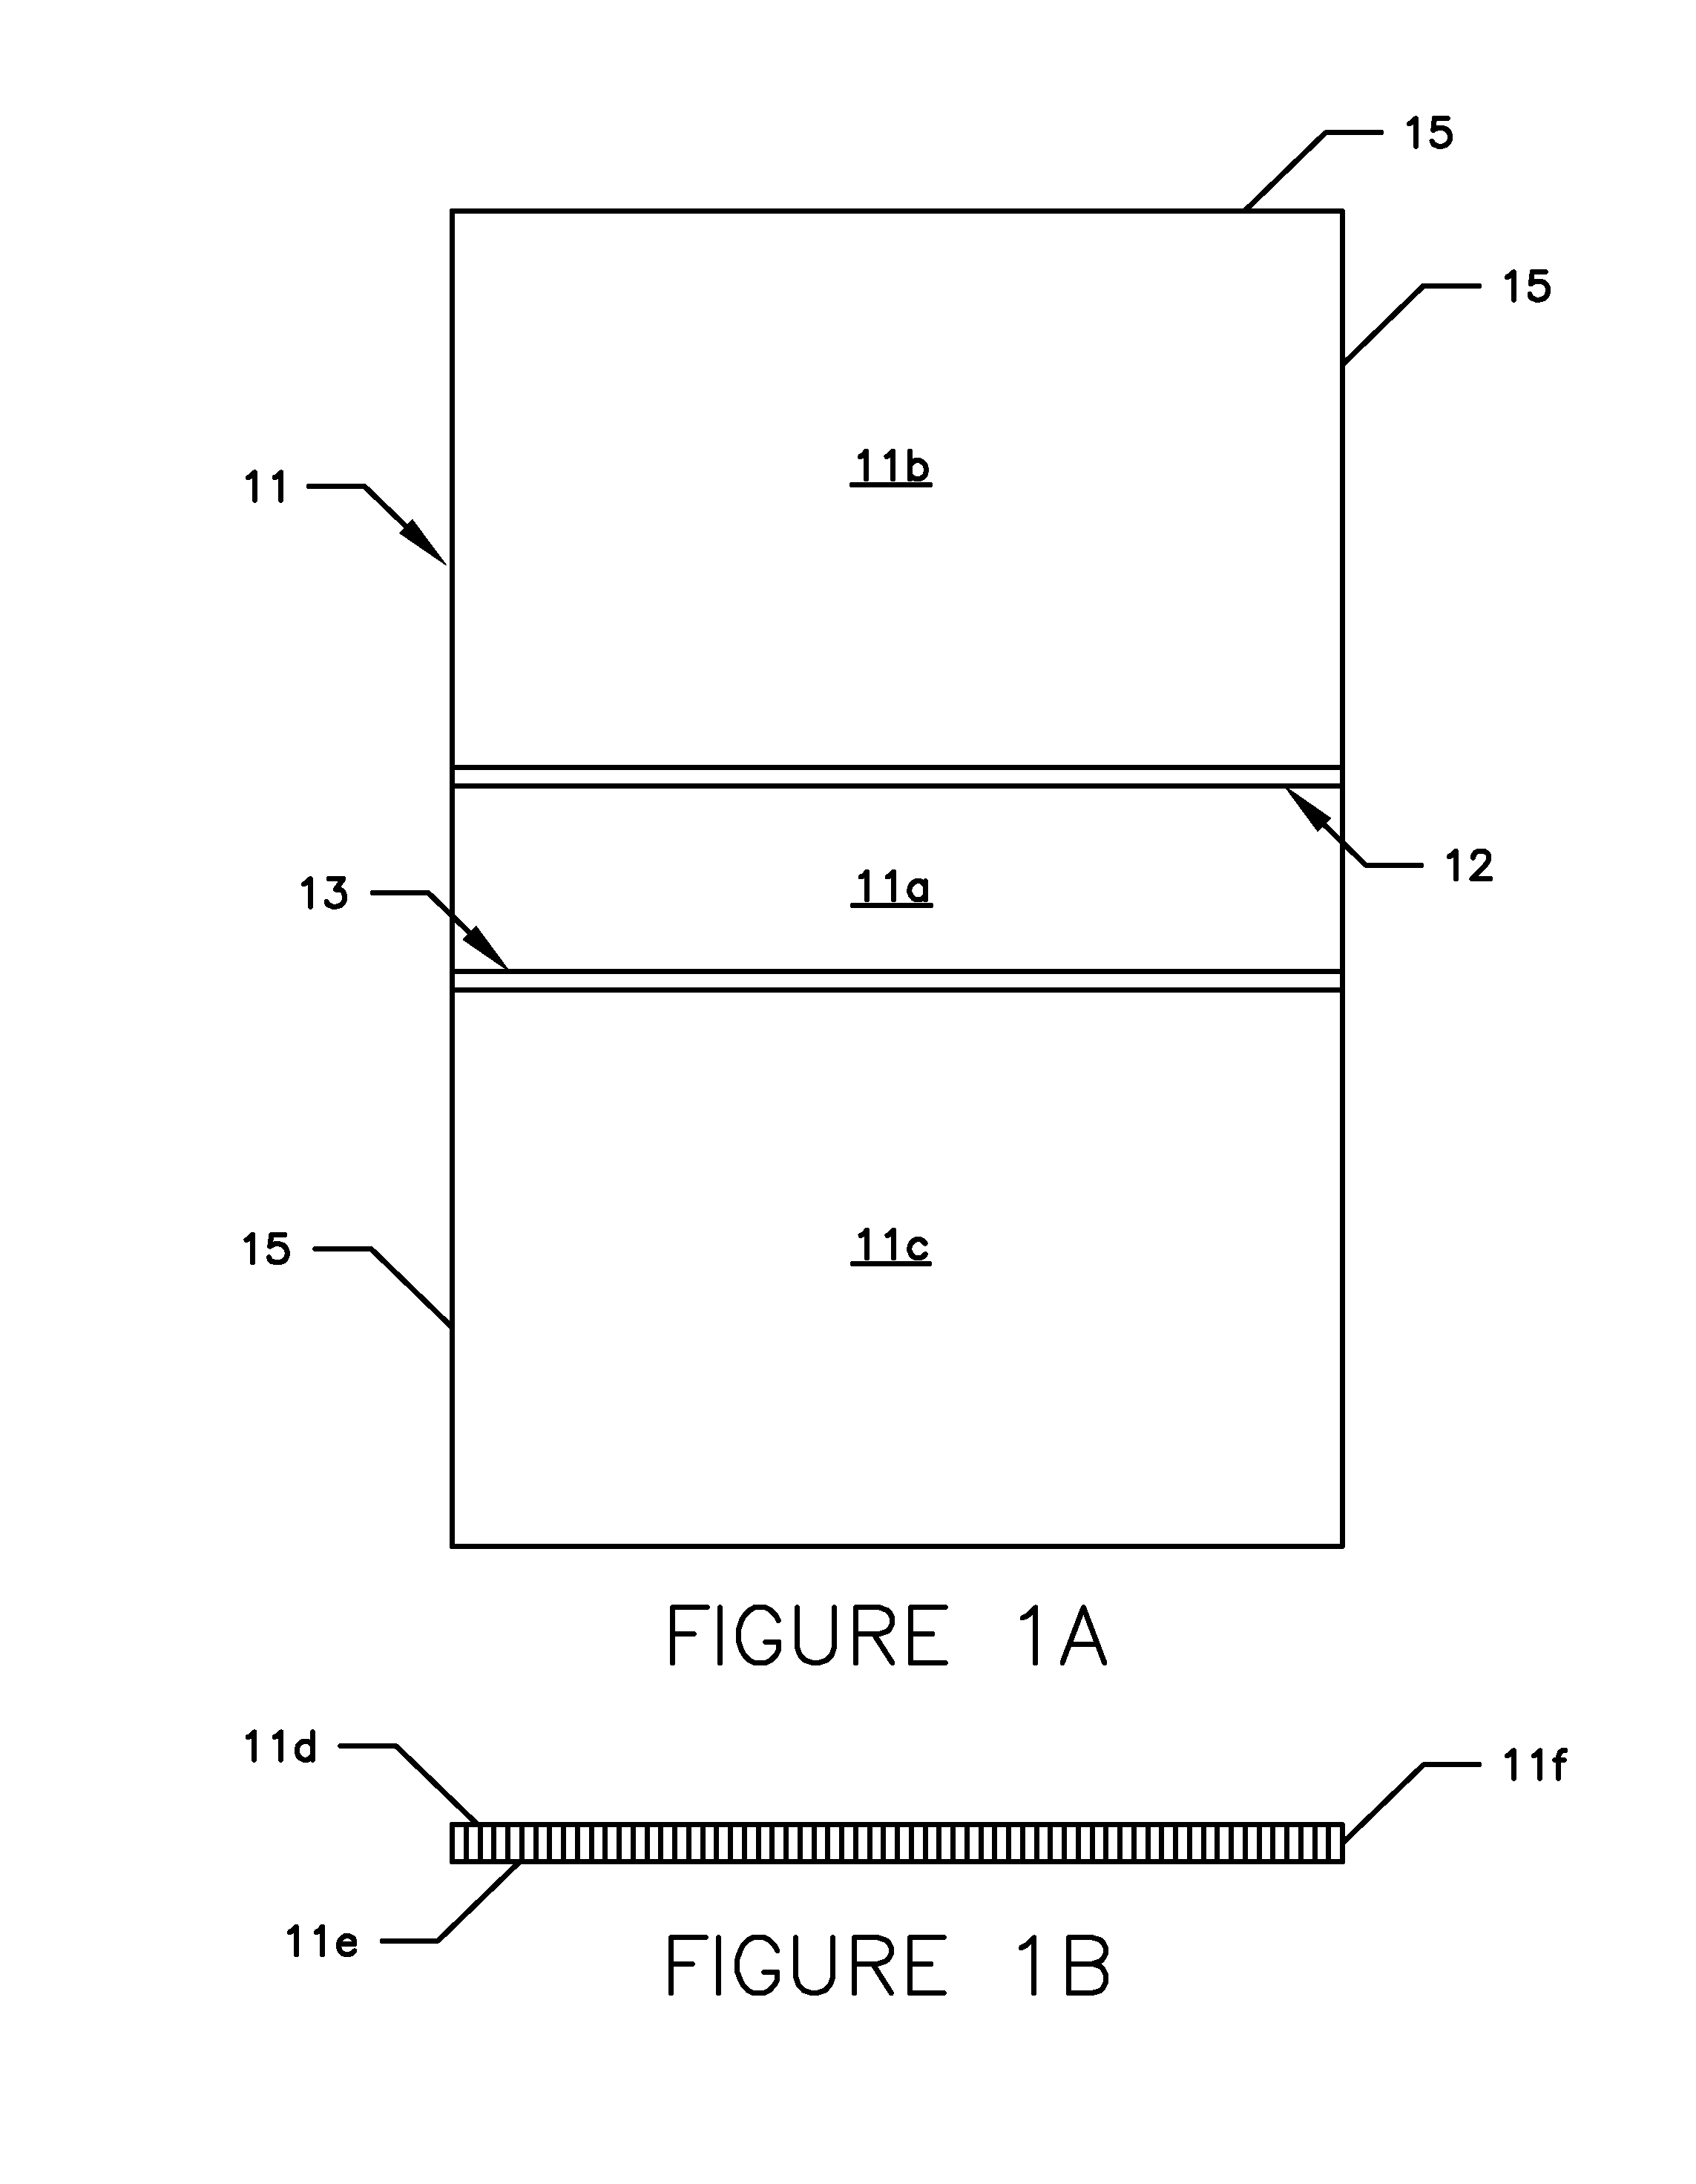 Protective enclosure for transporting an automobile door